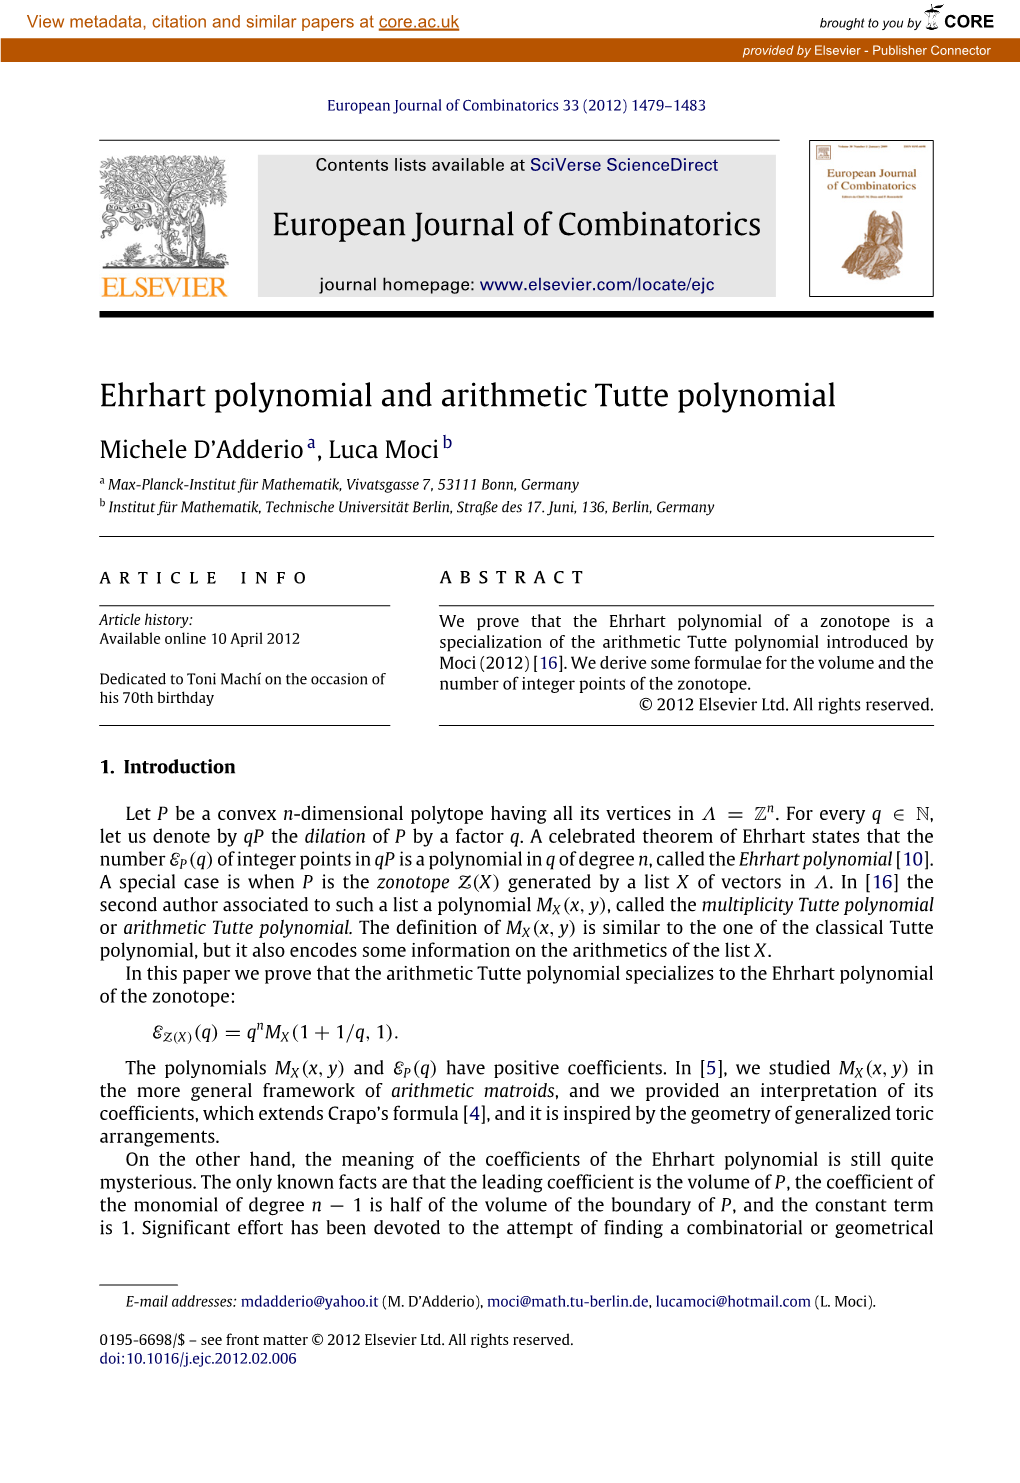 Ehrhart Polynomial and Arithmetic Tutte Polynomial